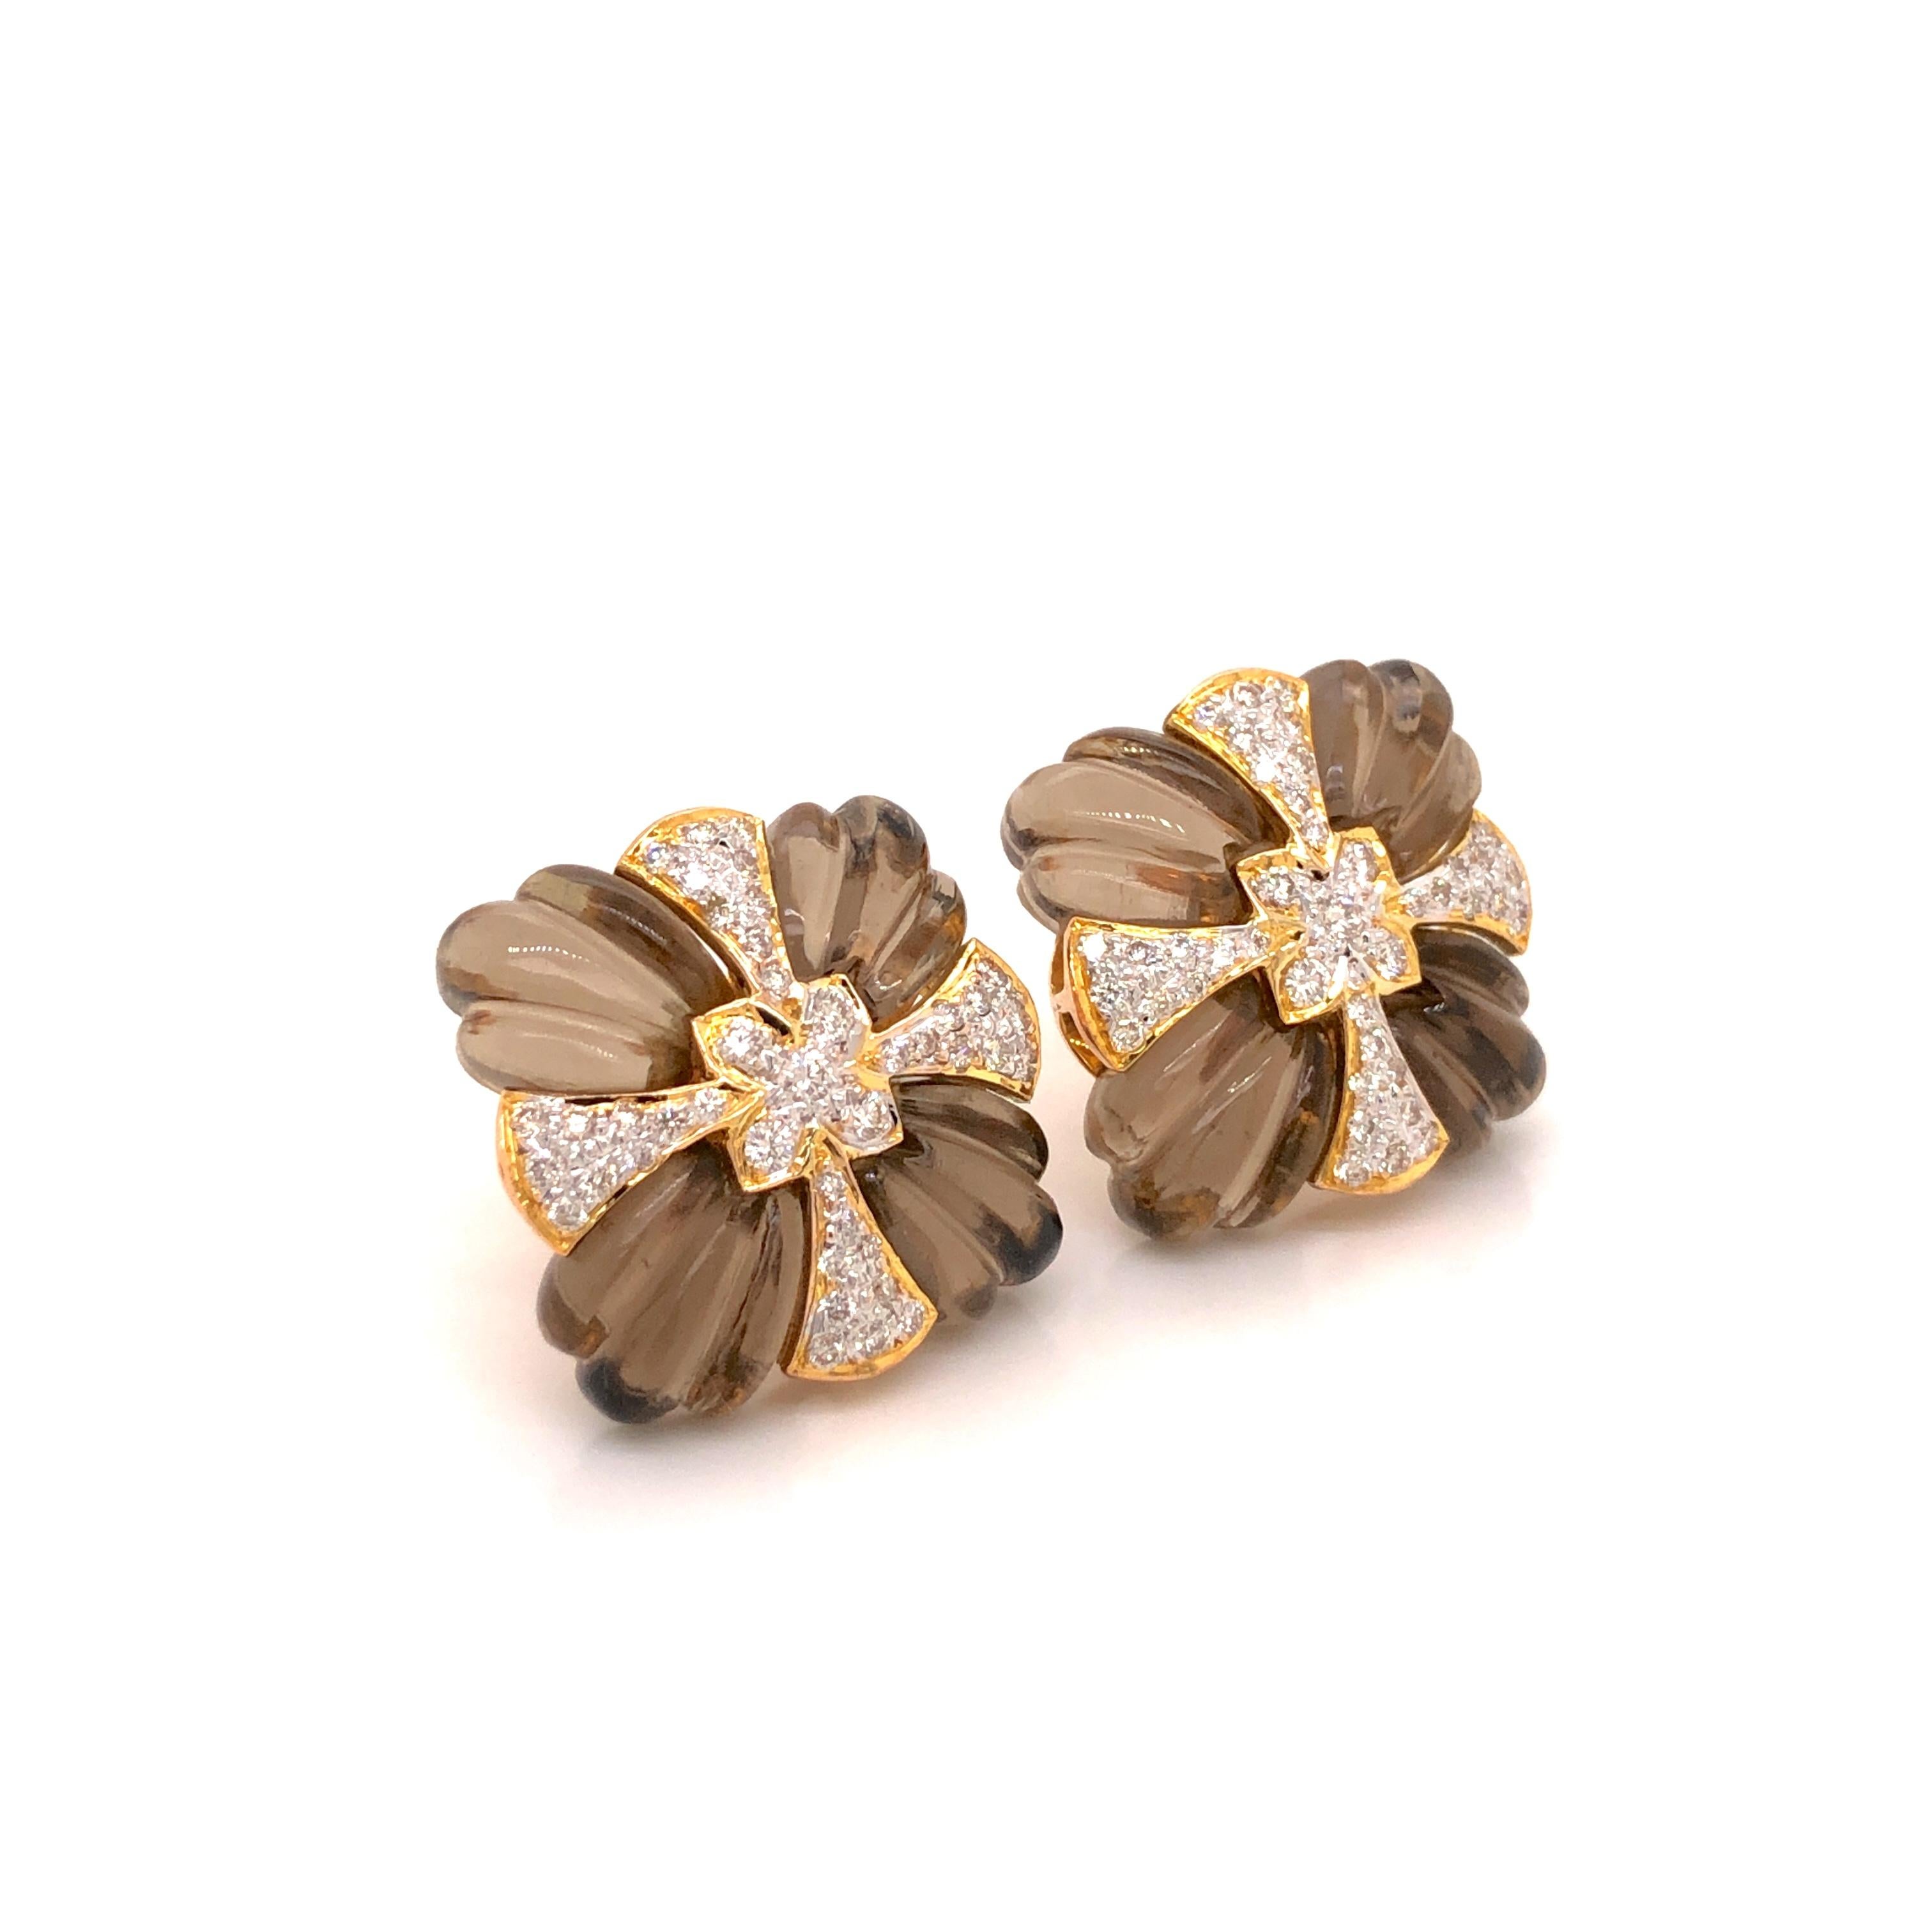 Natural Smoky Quartz Carving with Diamond Studs Earring in 18 Karat Gold In New Condition For Sale In Jaipur, Rajasthan